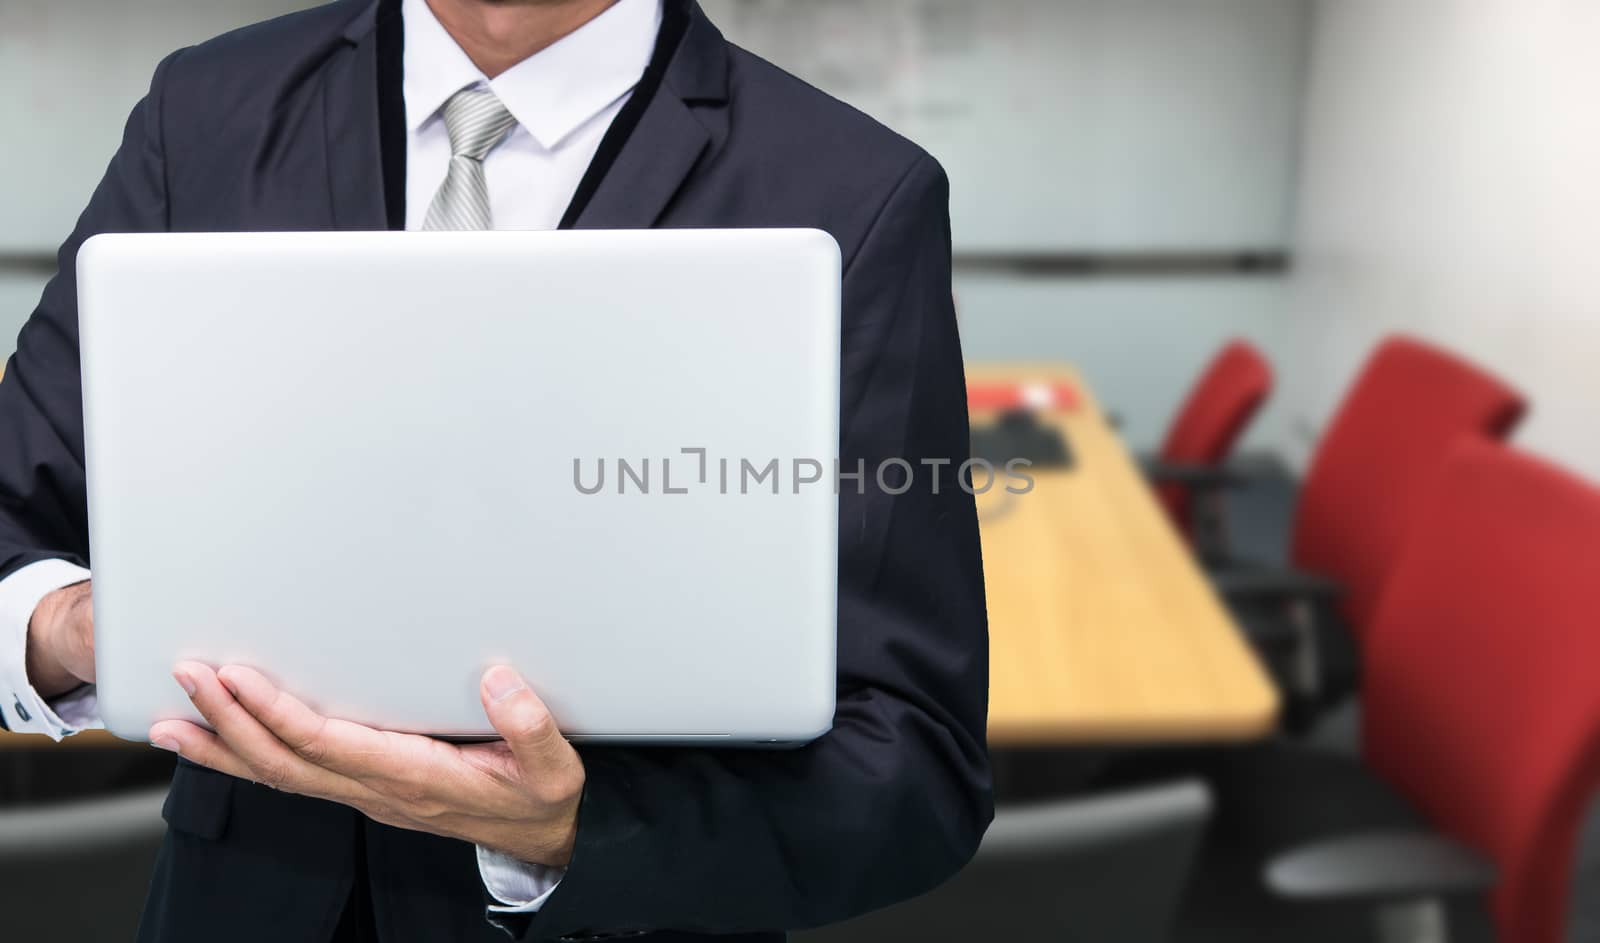 Businessman hold laptop computer in meeting room